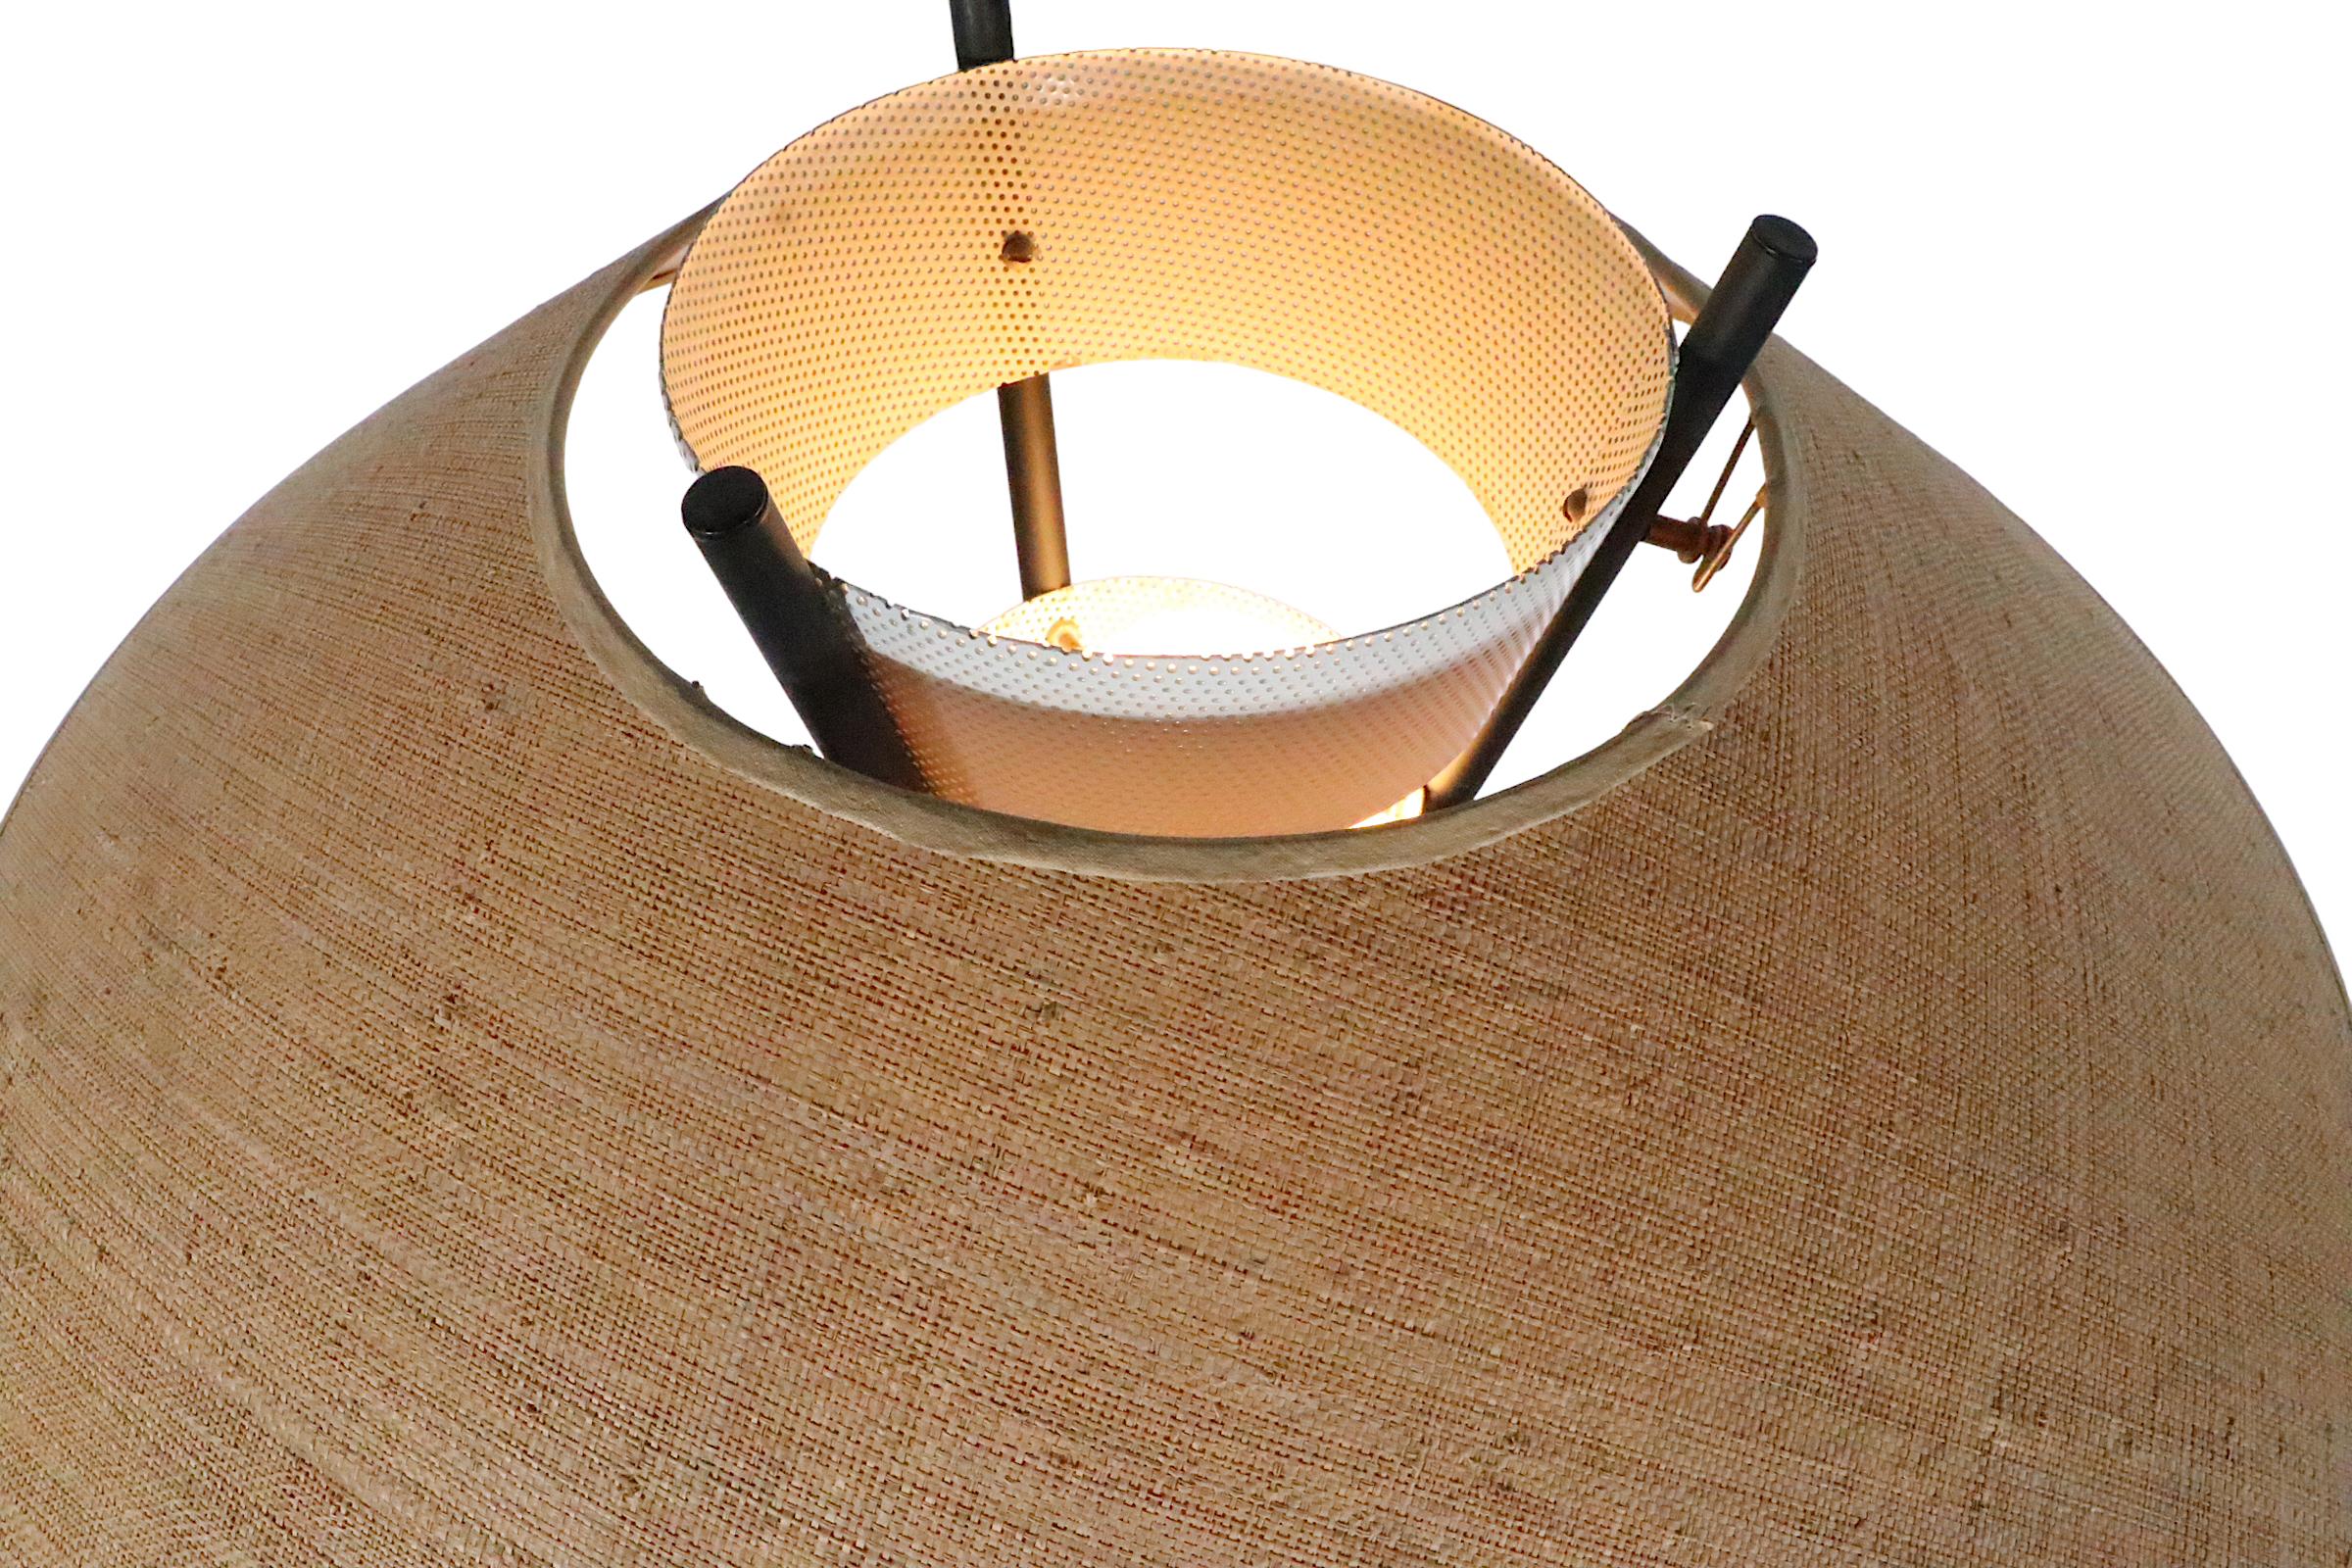 Midcentury Tri Pod Table Lamp by Gerald Thurston for Lightolier C 1950s For Sale 5